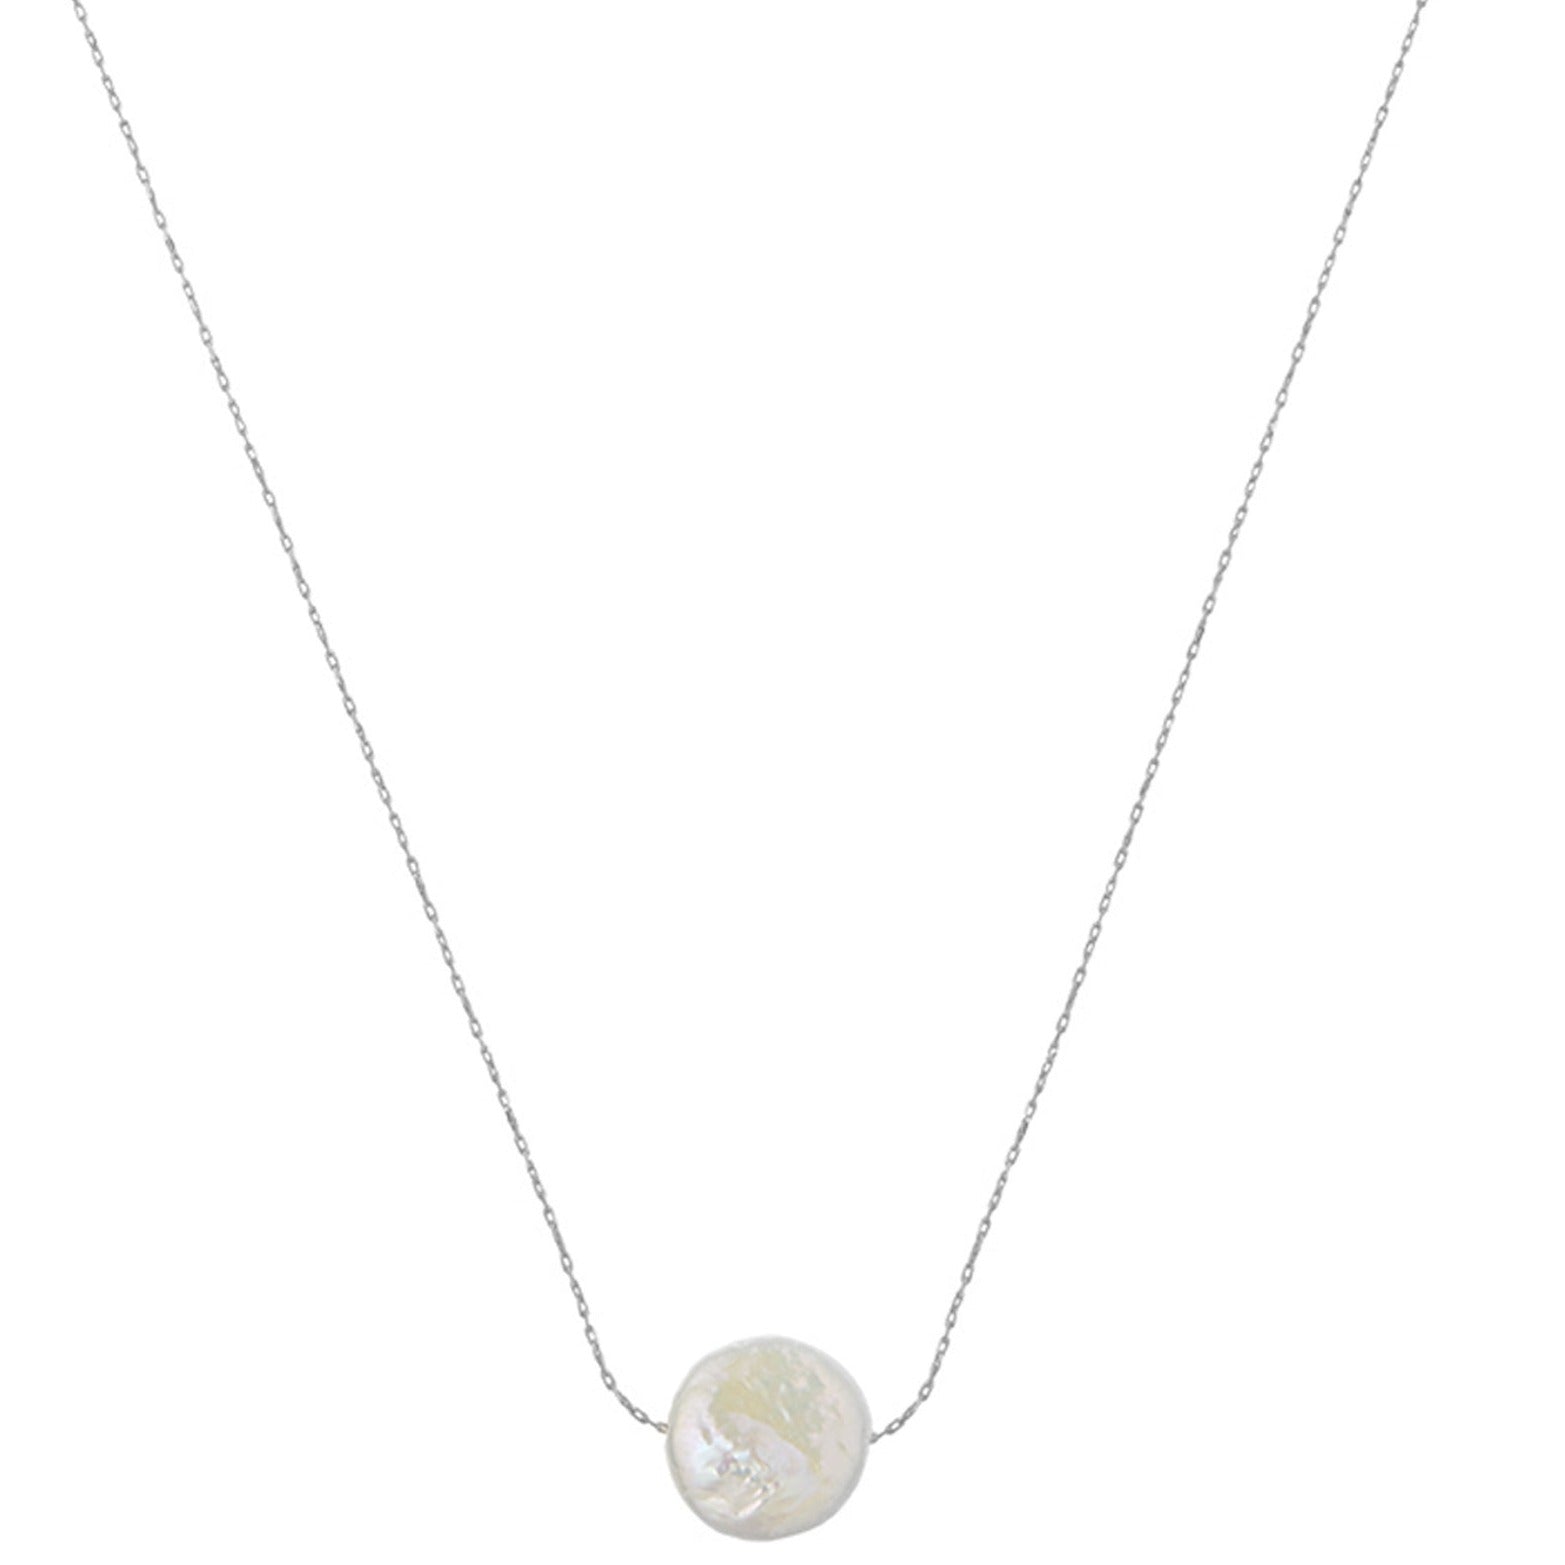 Stationed Flat Pearl Collar Necklace - Silver - Orelia London